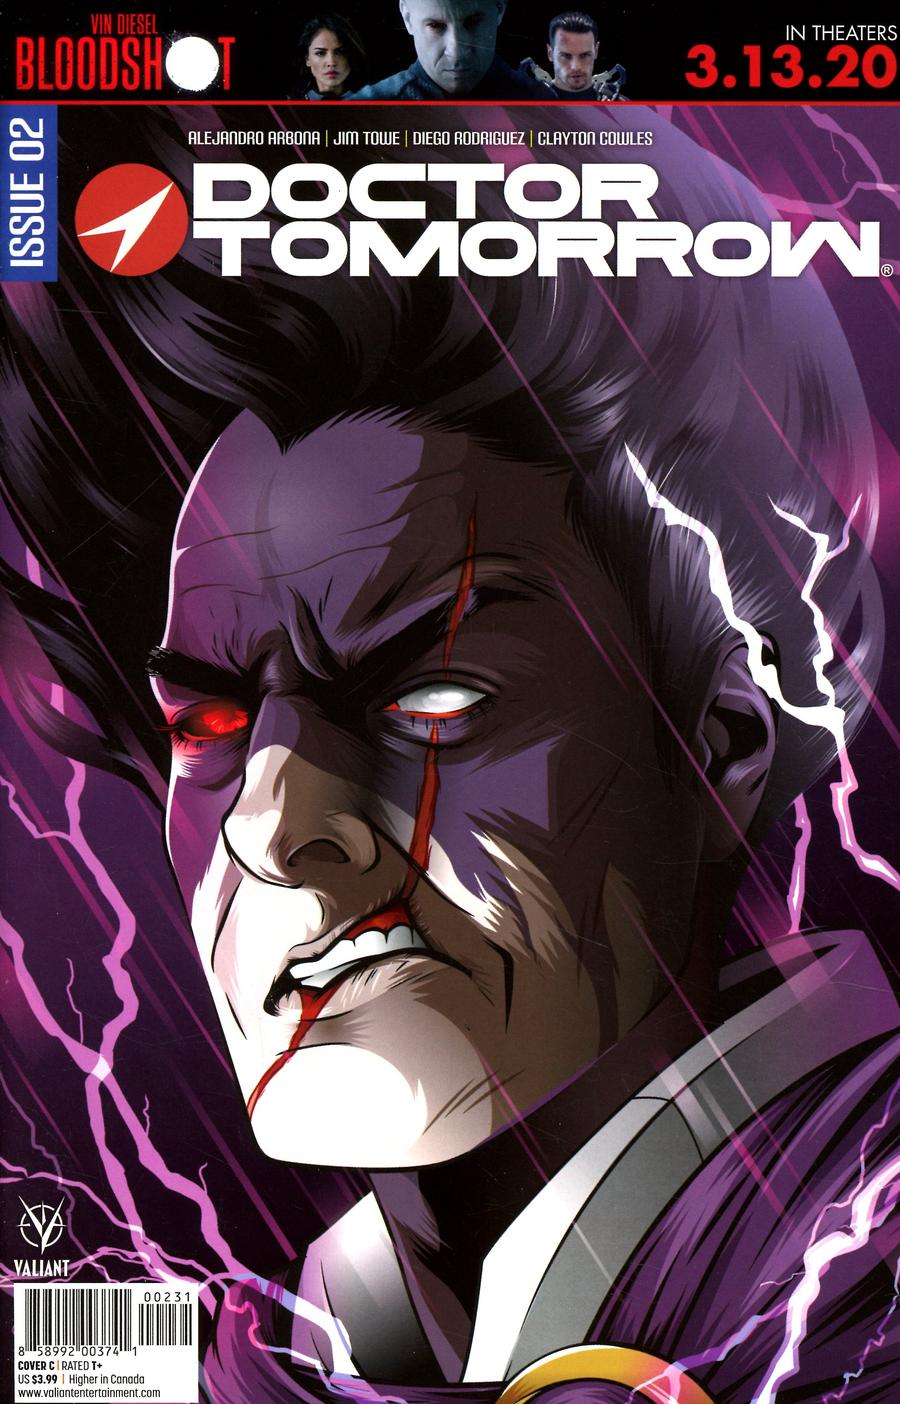 Doctor Tomorrow Vol 2 #2 Cover C Variant Cryssy Cheung Cover